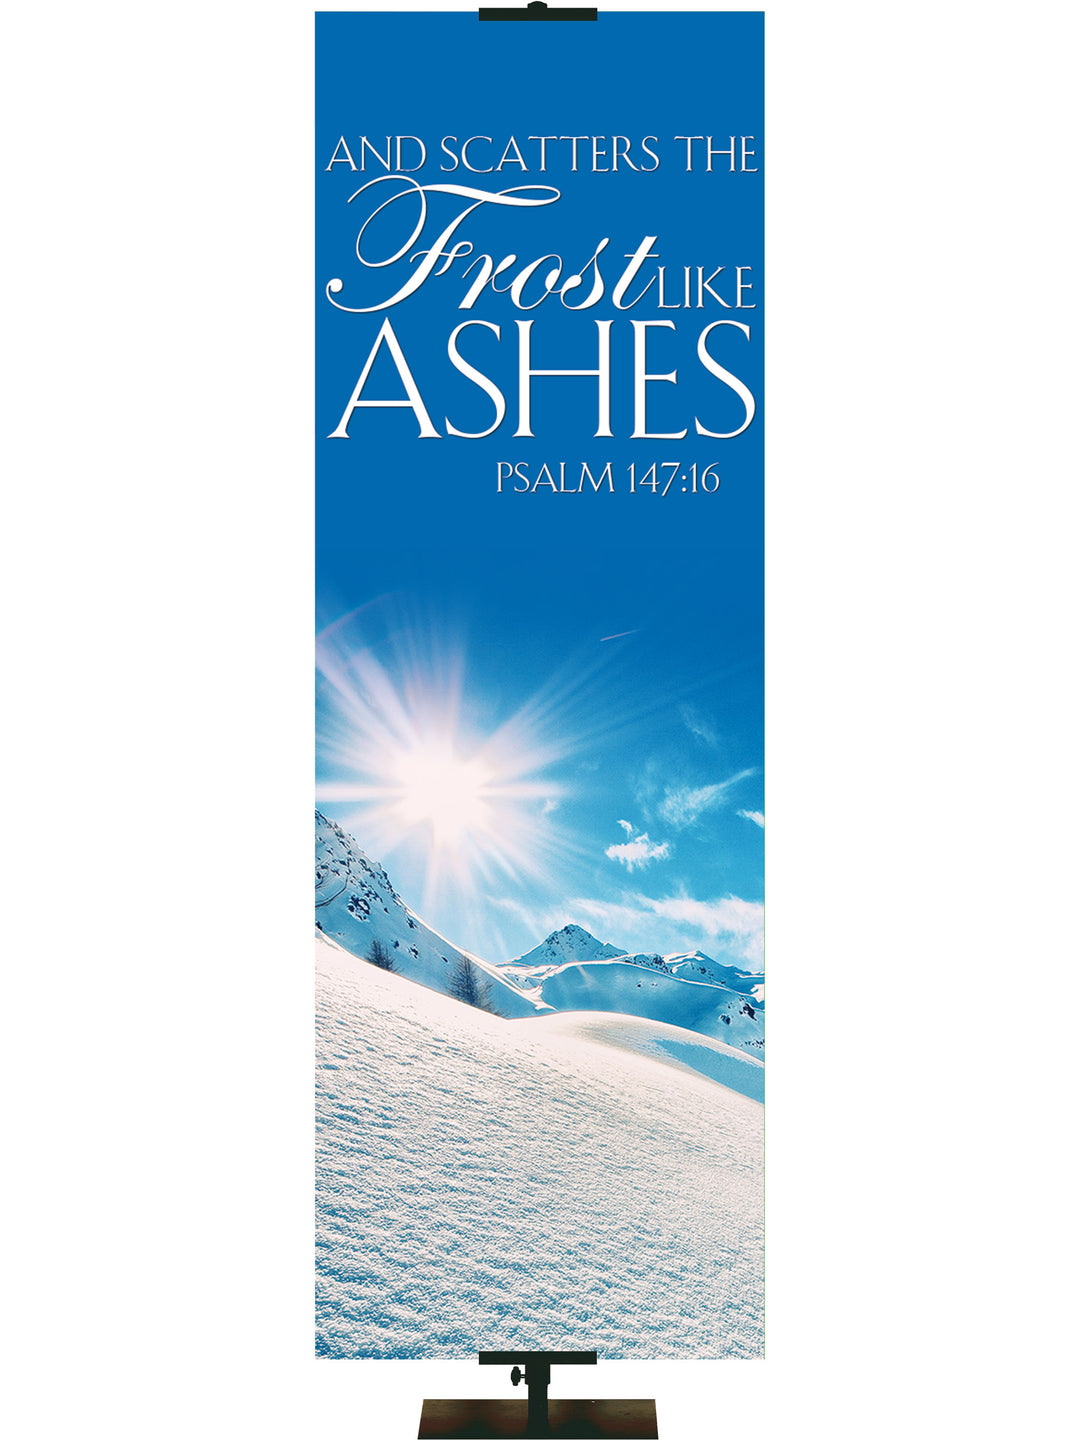 Portraits of Sacred Winter Frost like Ashes B - Christmas Banners - PraiseBanners